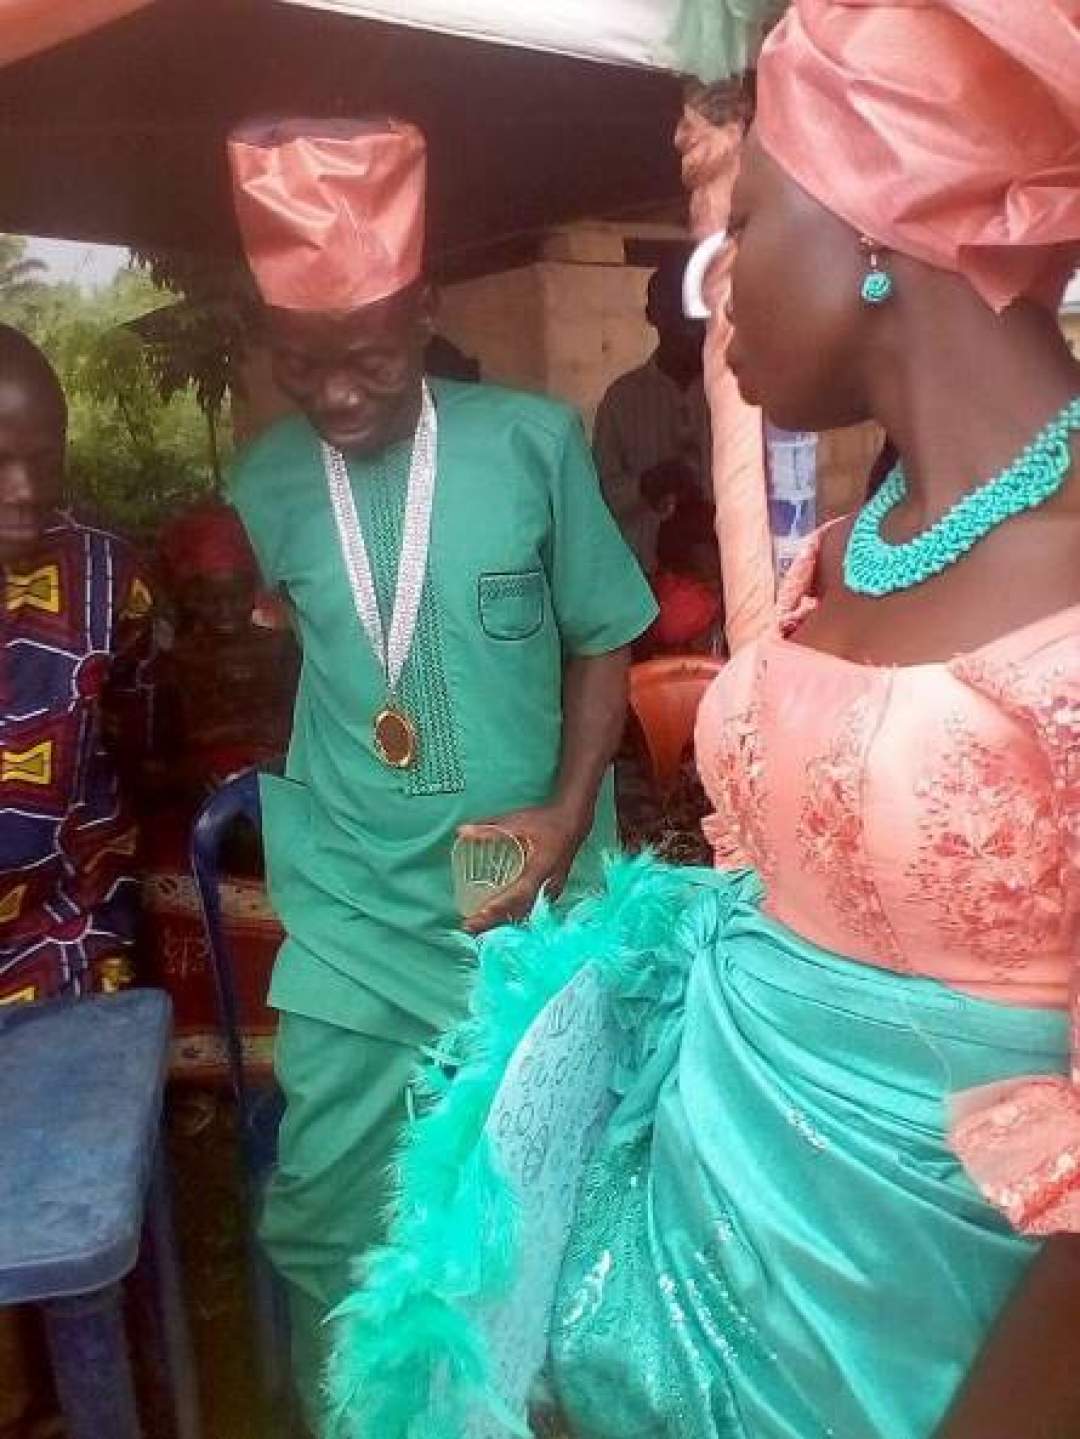 Bride looks 'unhappy' as she marries much older man in Anambra (Photos)